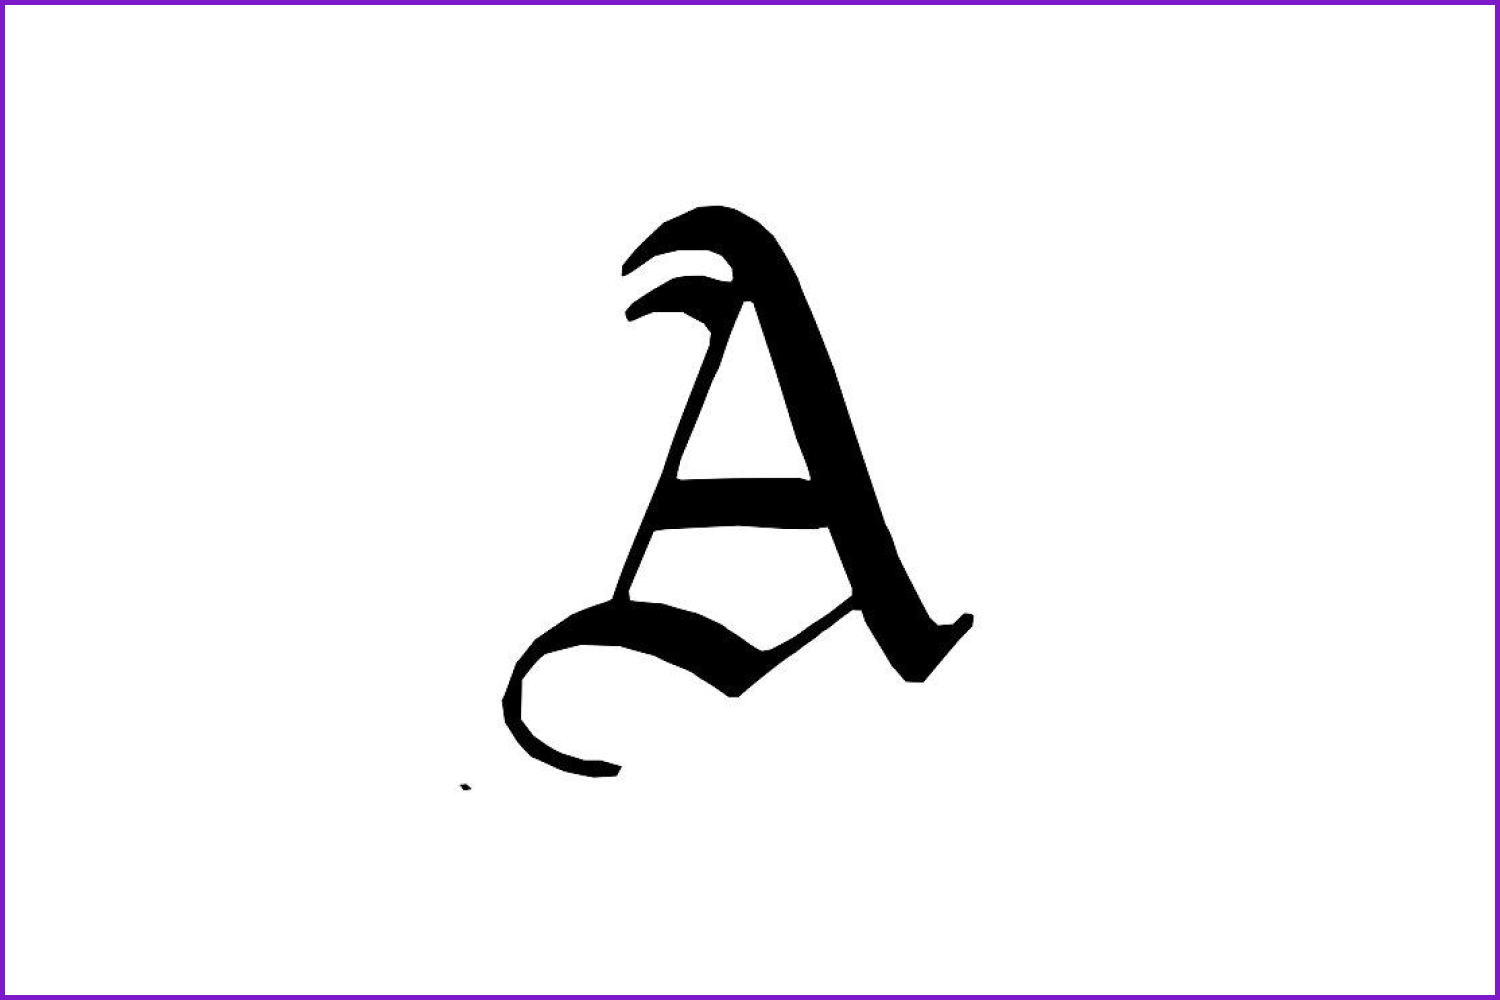 Large black letter A in the Gothic style on a white background.